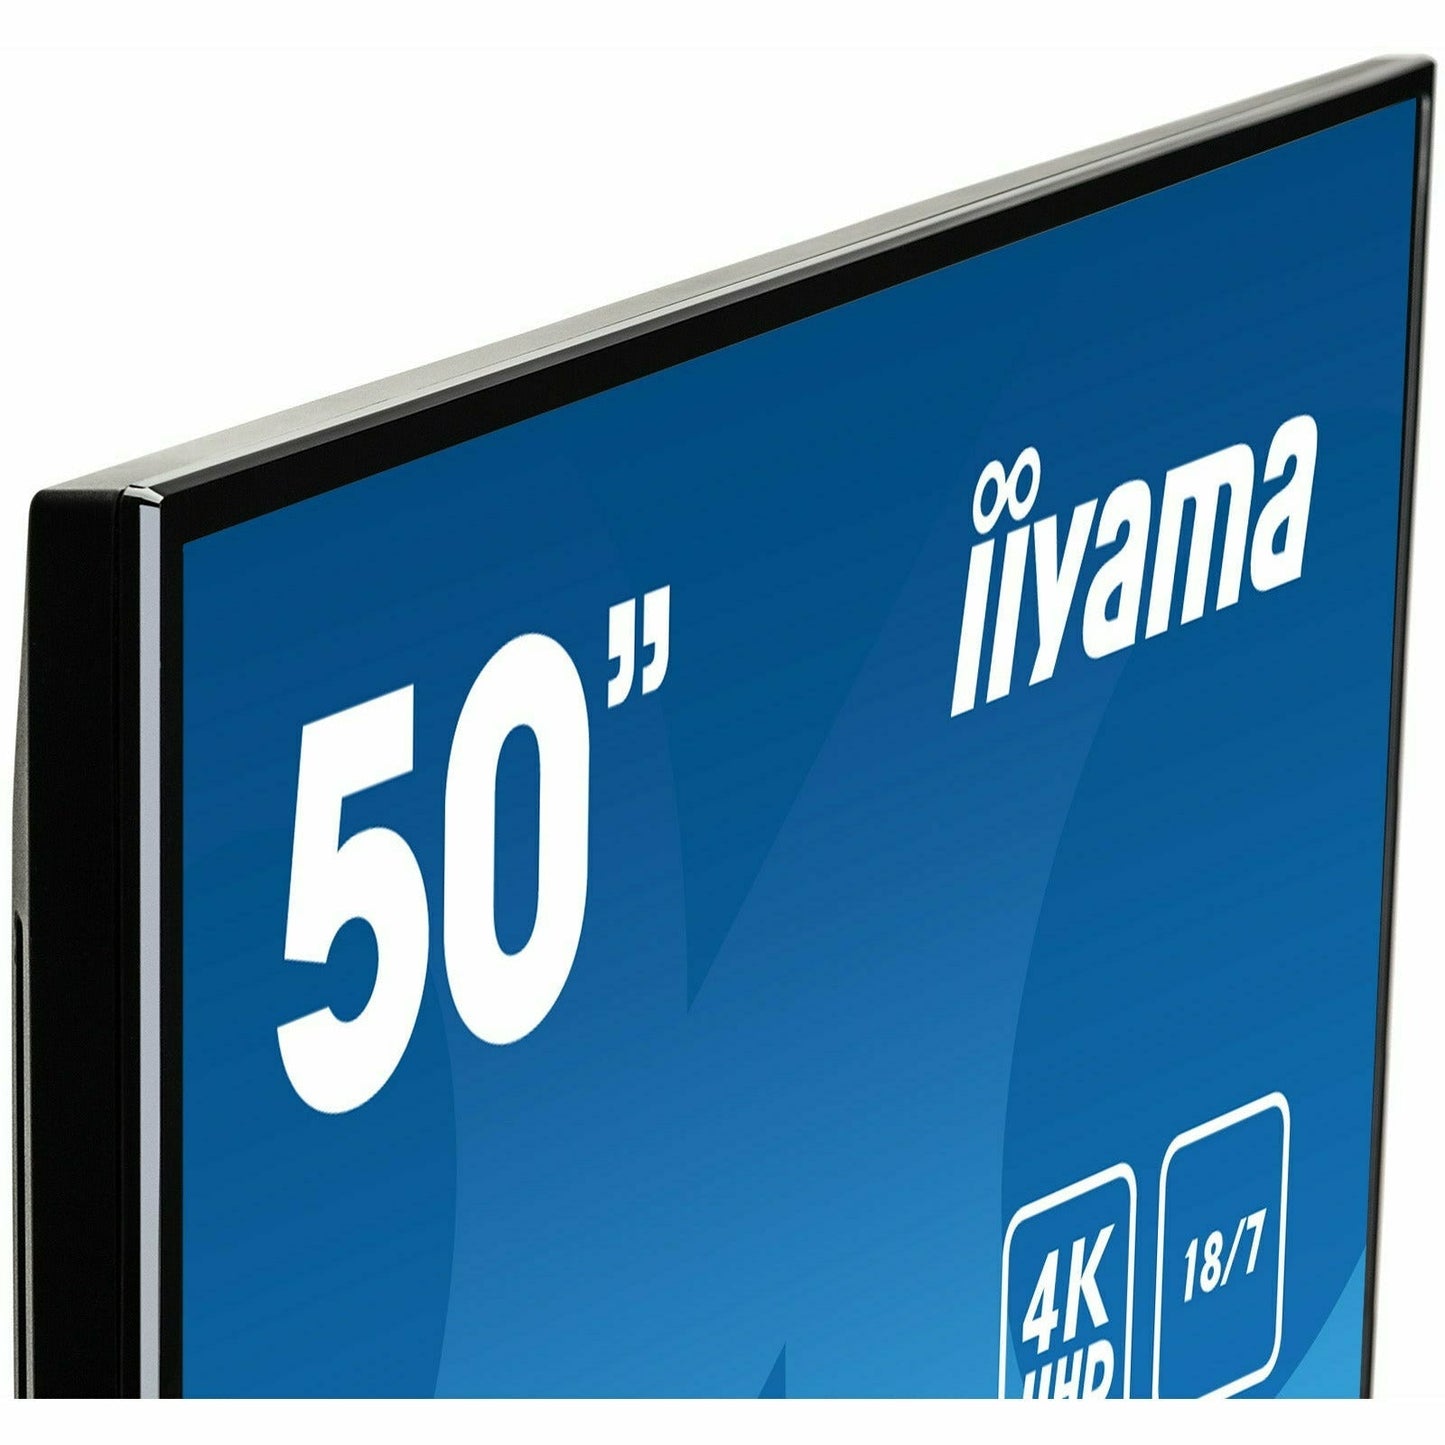 iiyama ProLite LE5040UHS-B1 50" Professional Digital Signage display with a 18/7 operating time and a 4K UHD resolution